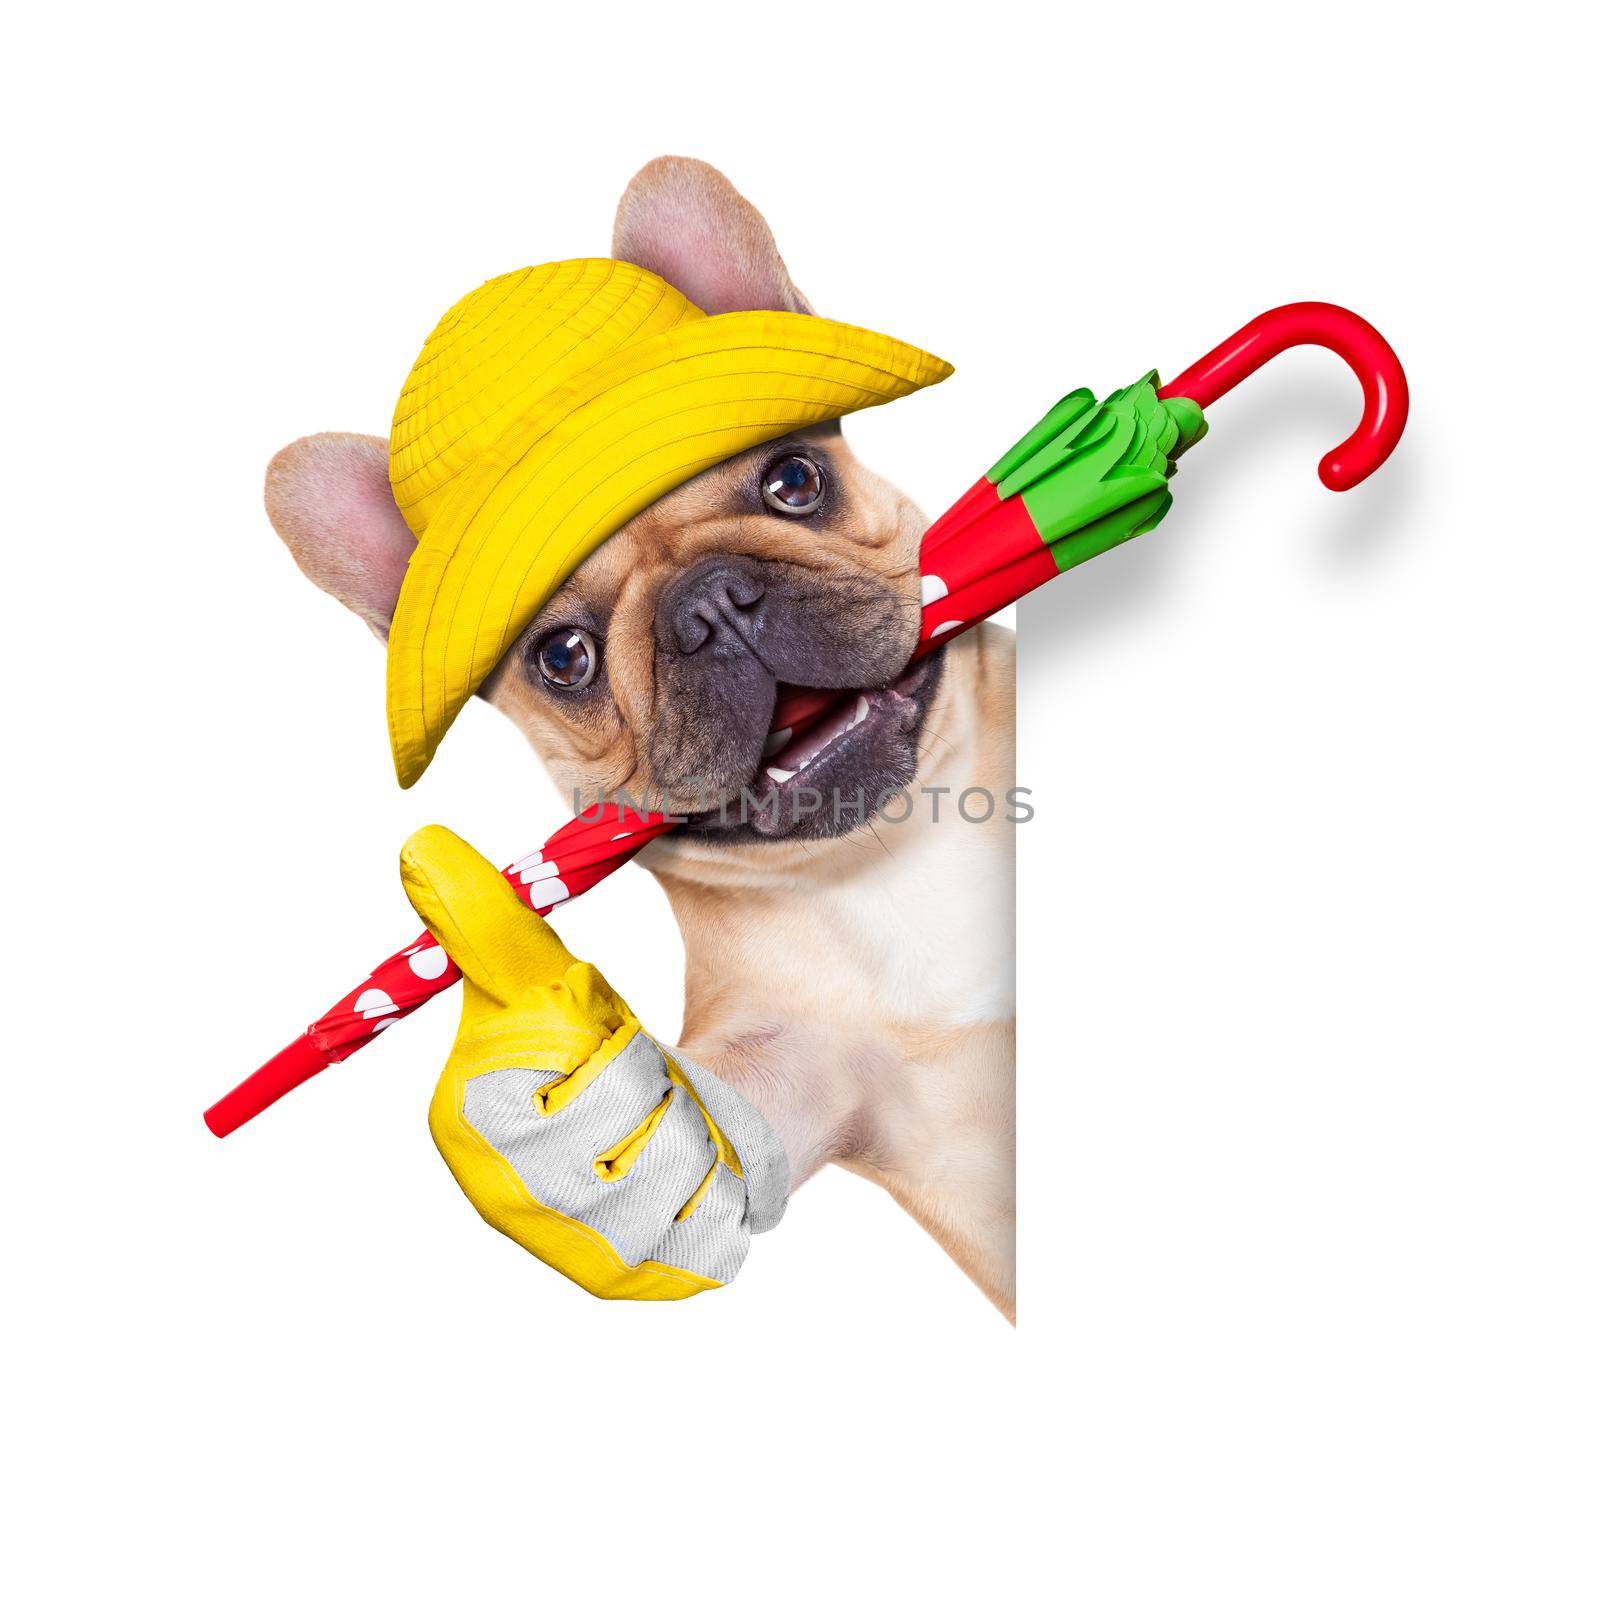 fawn french bulldog sitting and waiting to go for a walk with owner , prepared for rain and dirt,wearing rain boots , holding umbrella with mouth,  isolated on white background